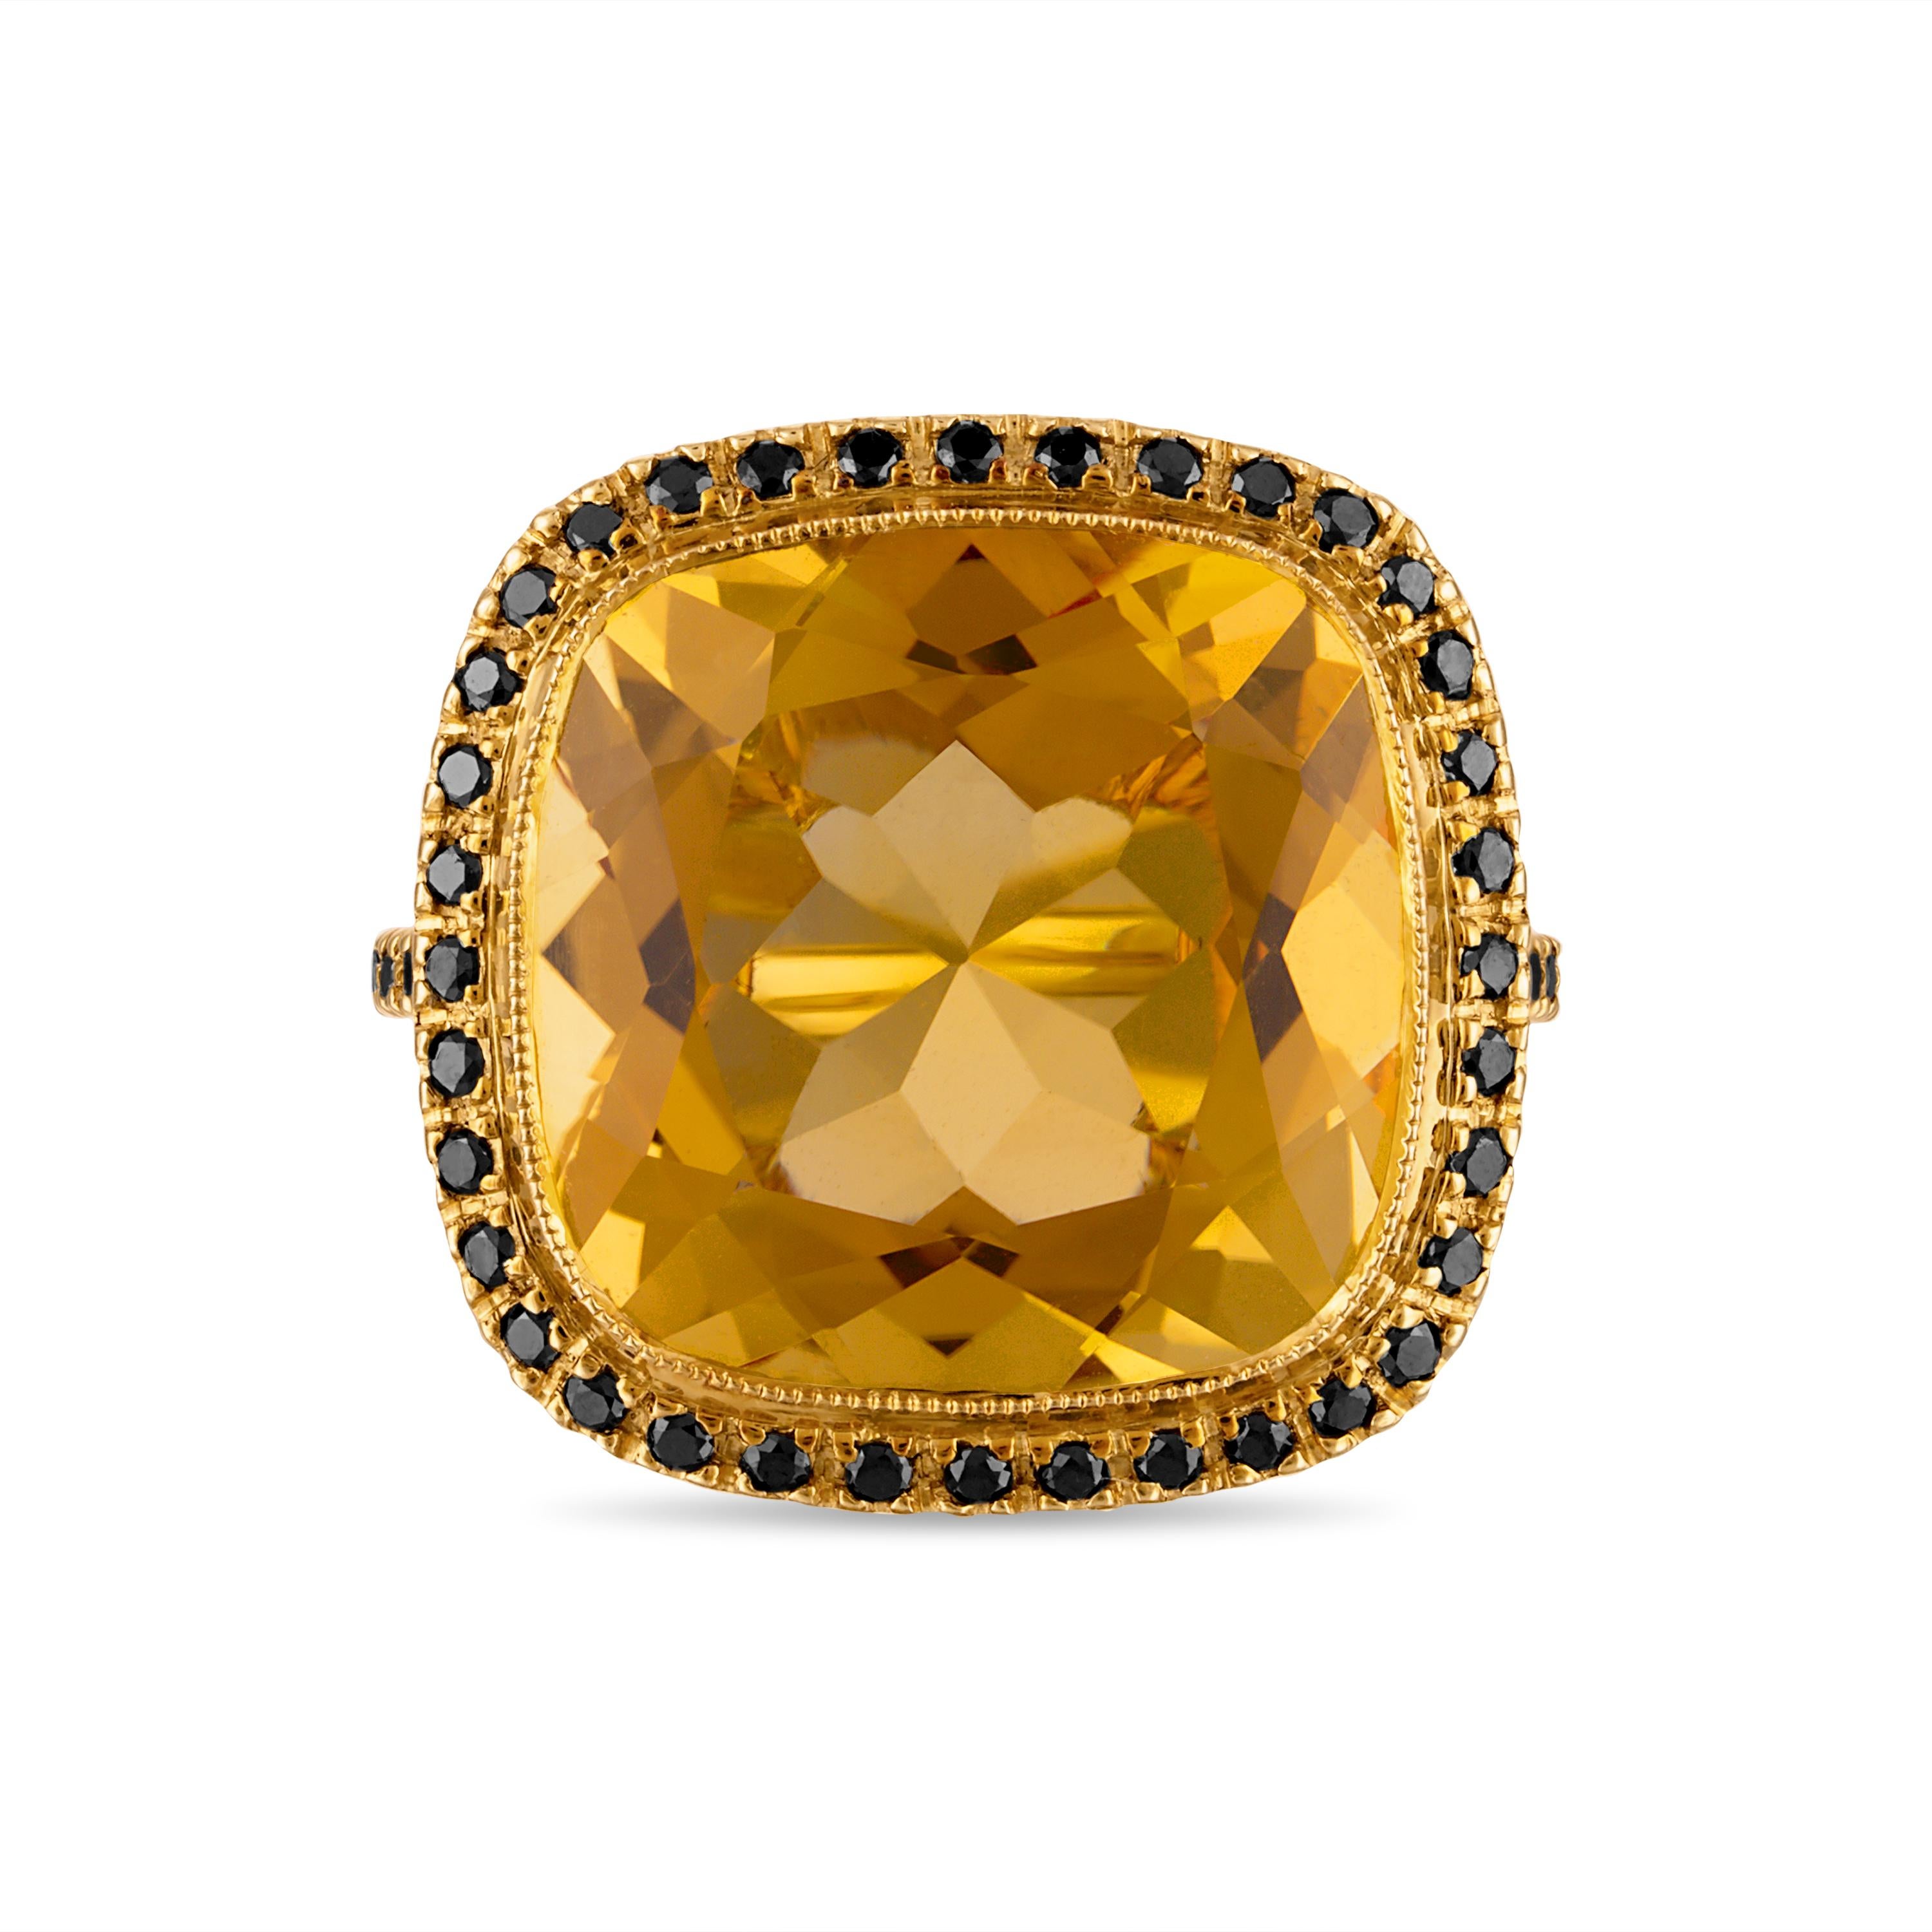 11.49 Carat Natural Cushion-Cut Citrine and Black Diamond Gold Cocktail Ring:

A beautiful cocktail ring, it features a natural cushion-cut citrine weighing 11.49 carat surrounded by round-brilliant black diamonds weighing 0.41 carat. The citrine